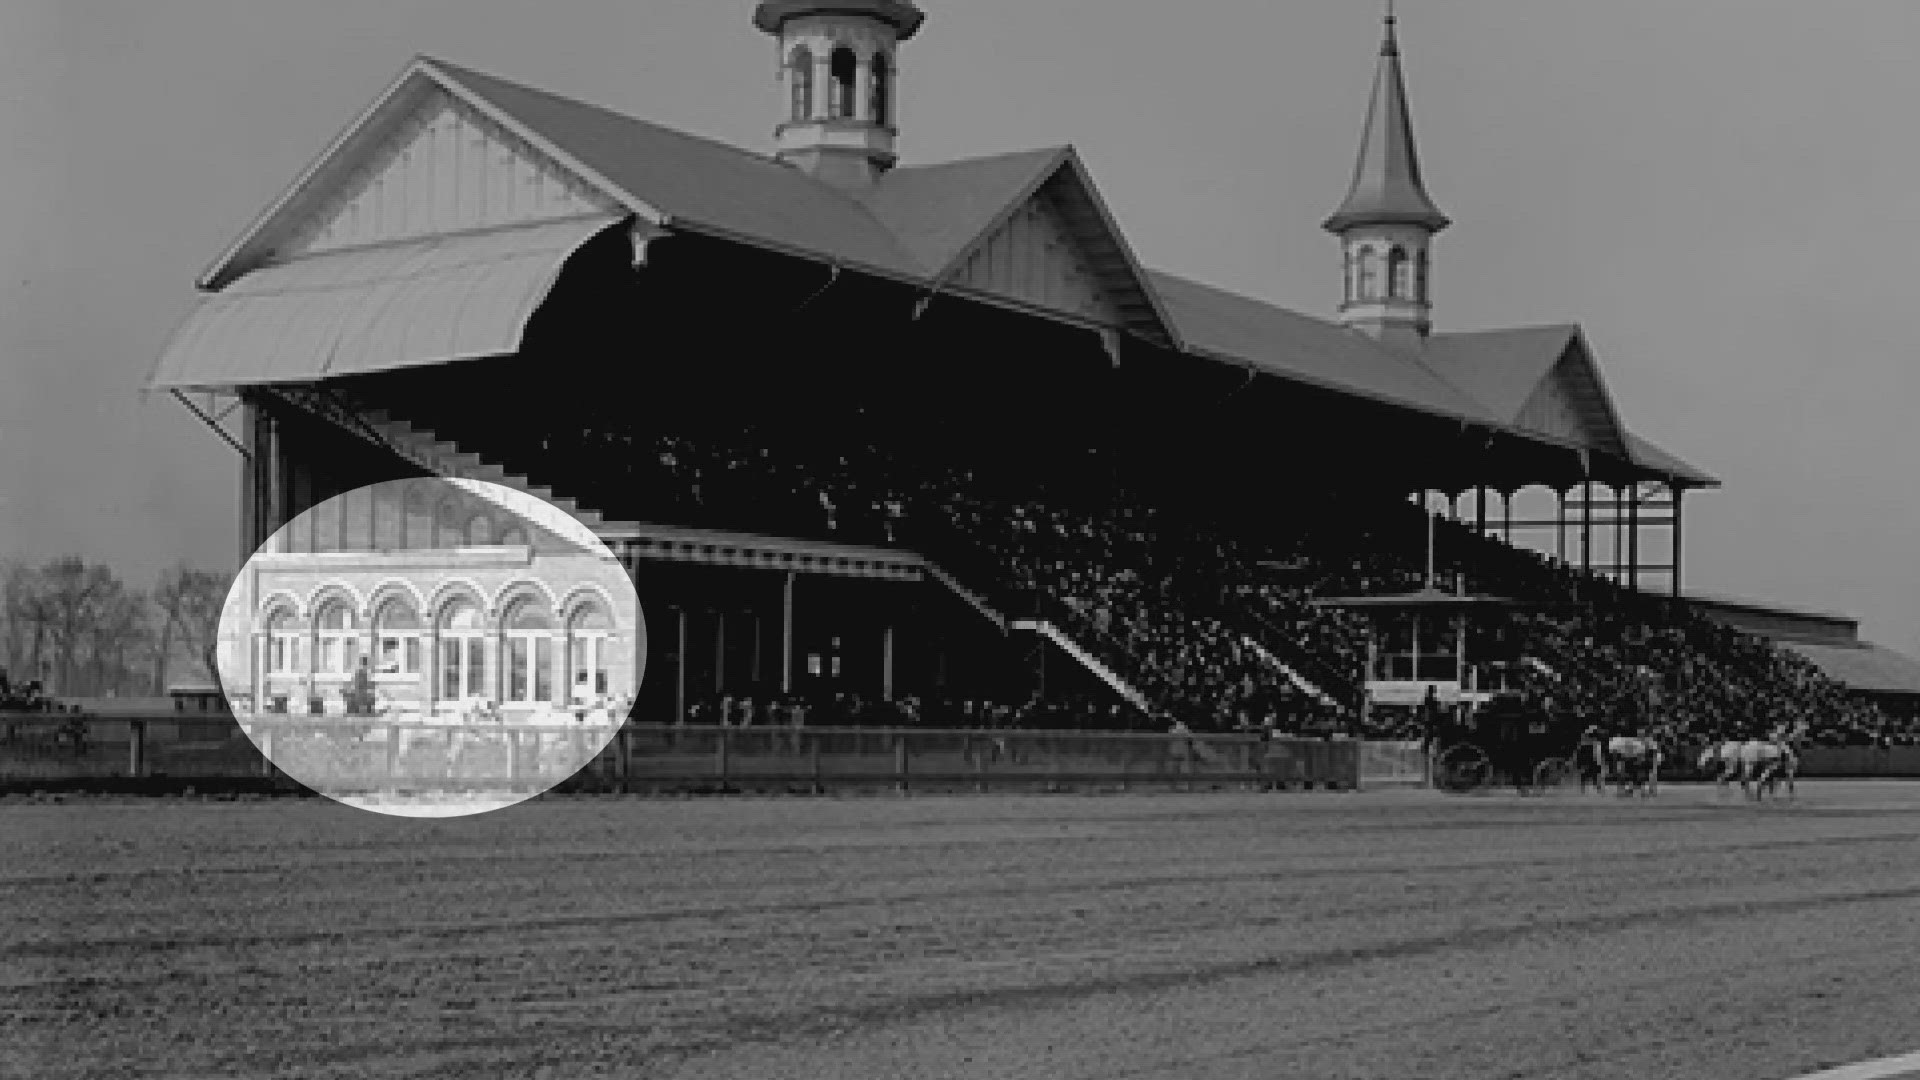 The brick wall with curved arches and port hole windows is part of the original Louisville Jockey Club Grandstand which opened with the Twin Spires in 1895.